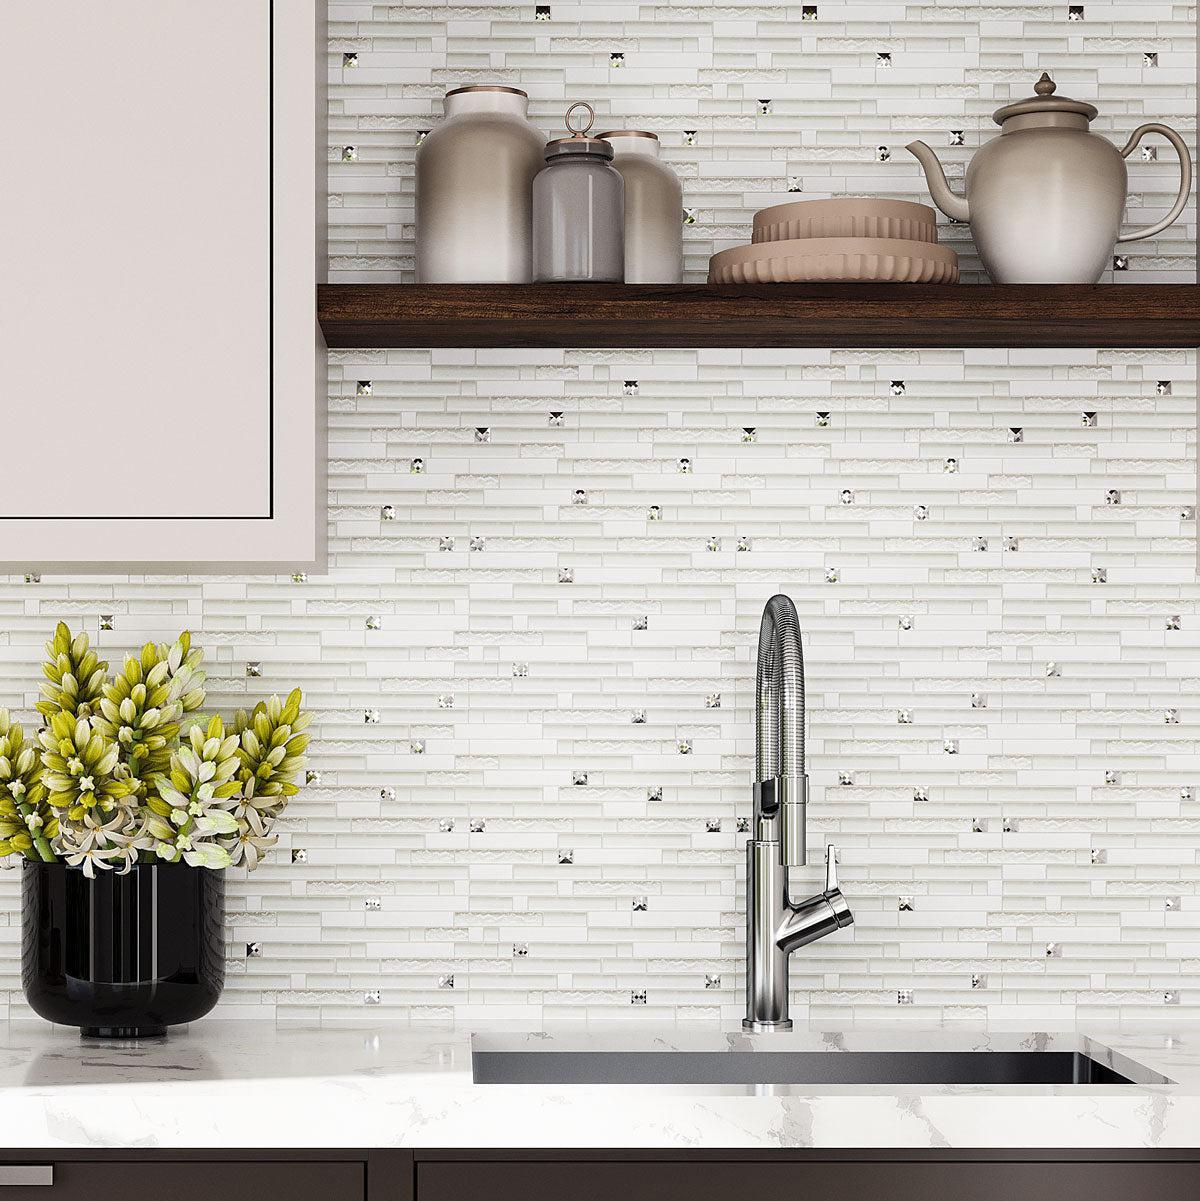 Ice Shale Rectangular White Glass And Stone Wall Tile